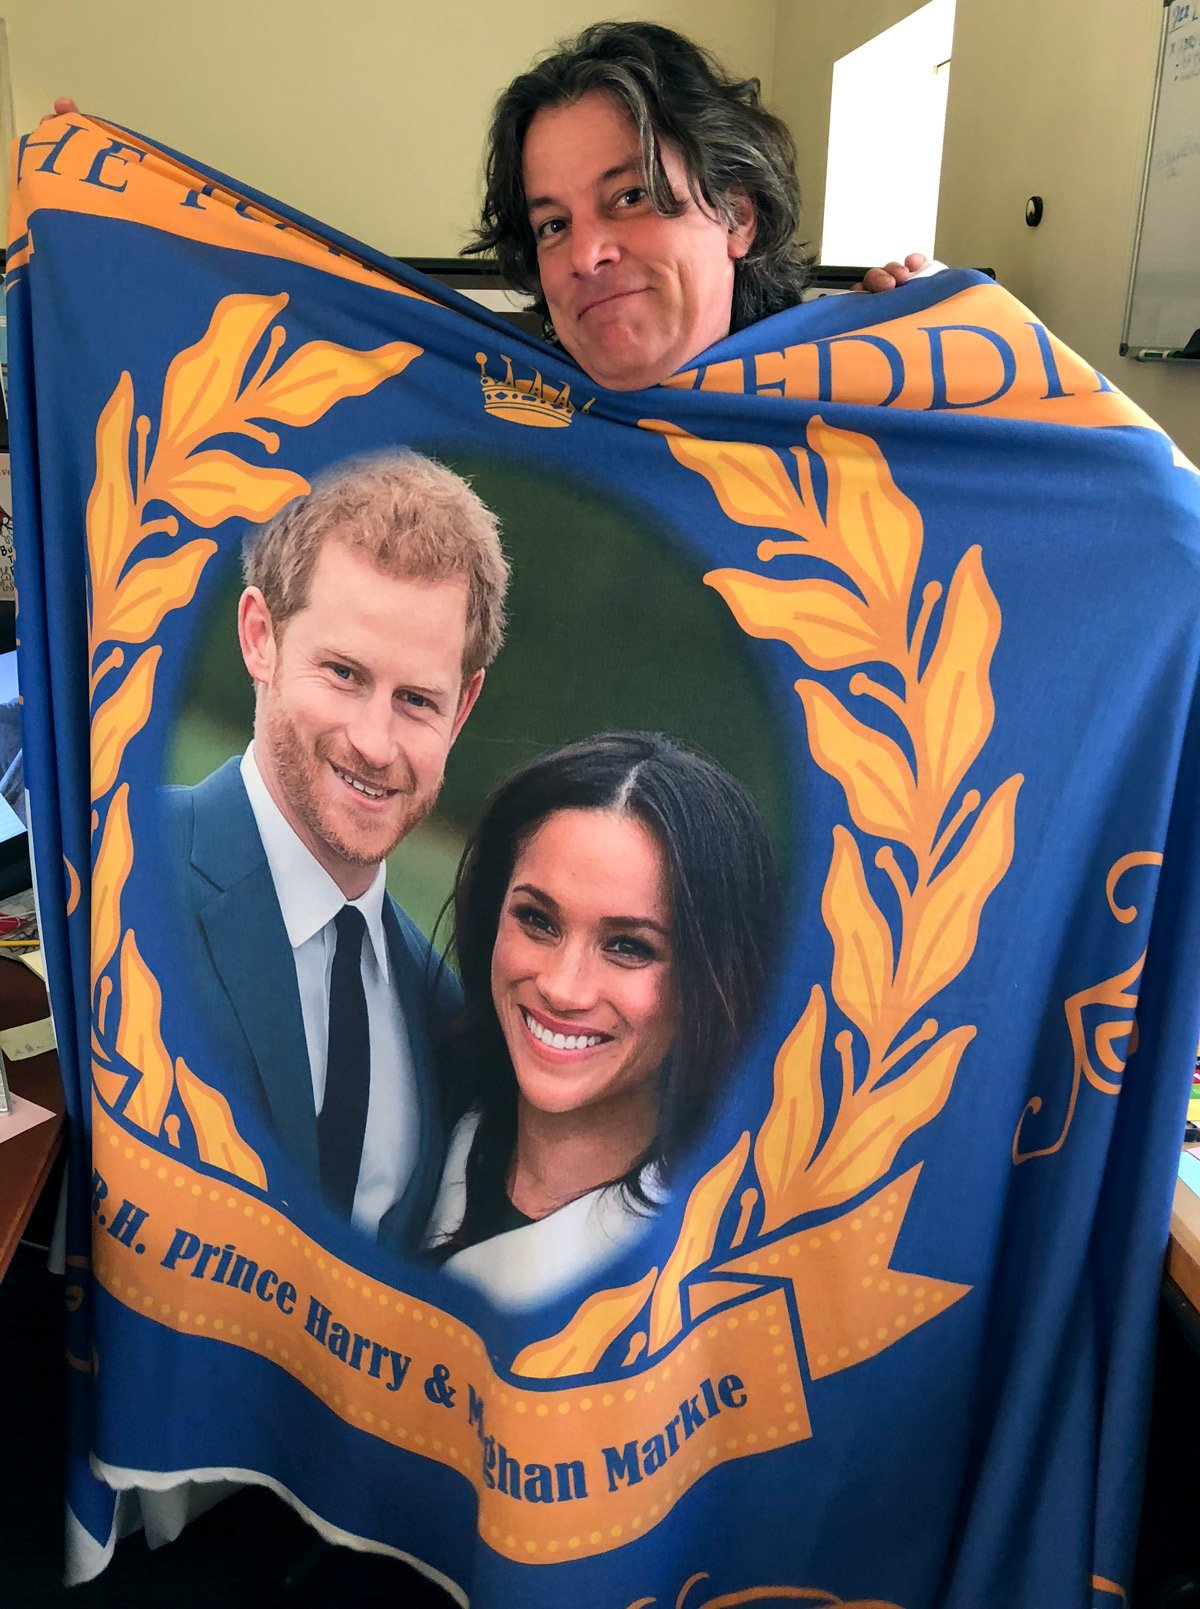 The Middle Prince Harry Mehgan Markle Blanket